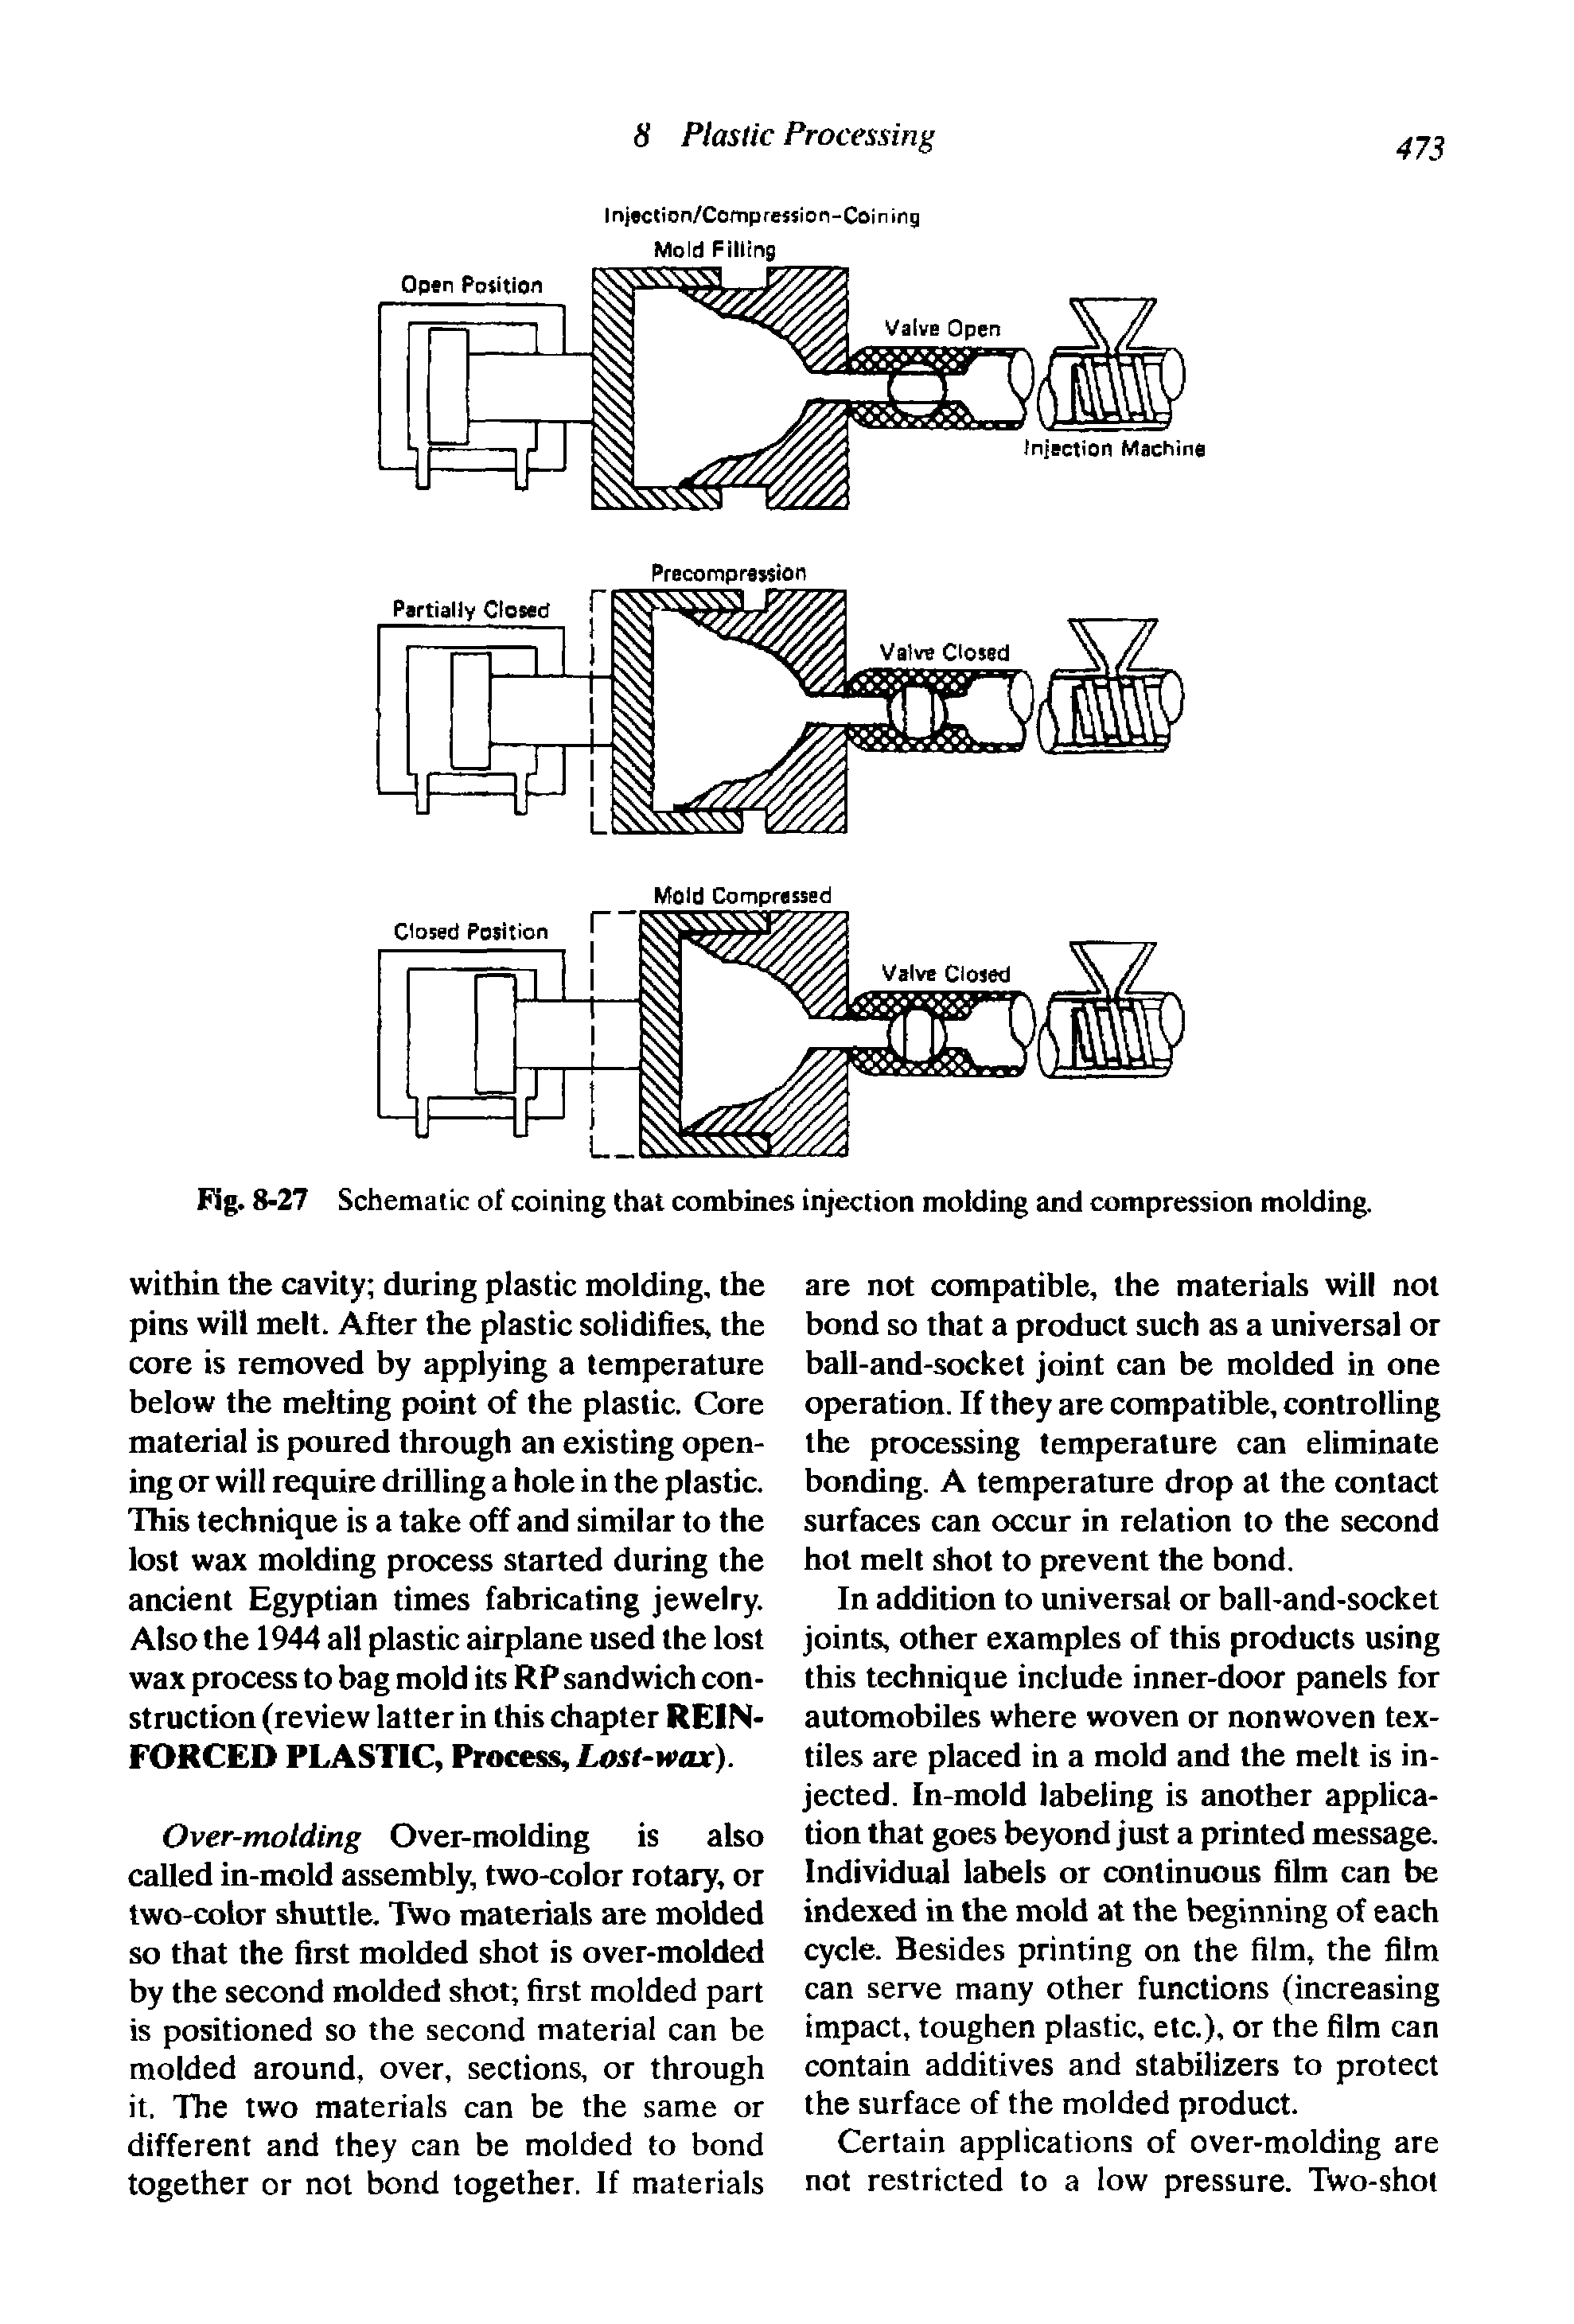 Fig. 8-27 Schematic of coining that combines injection molding and compression molding.